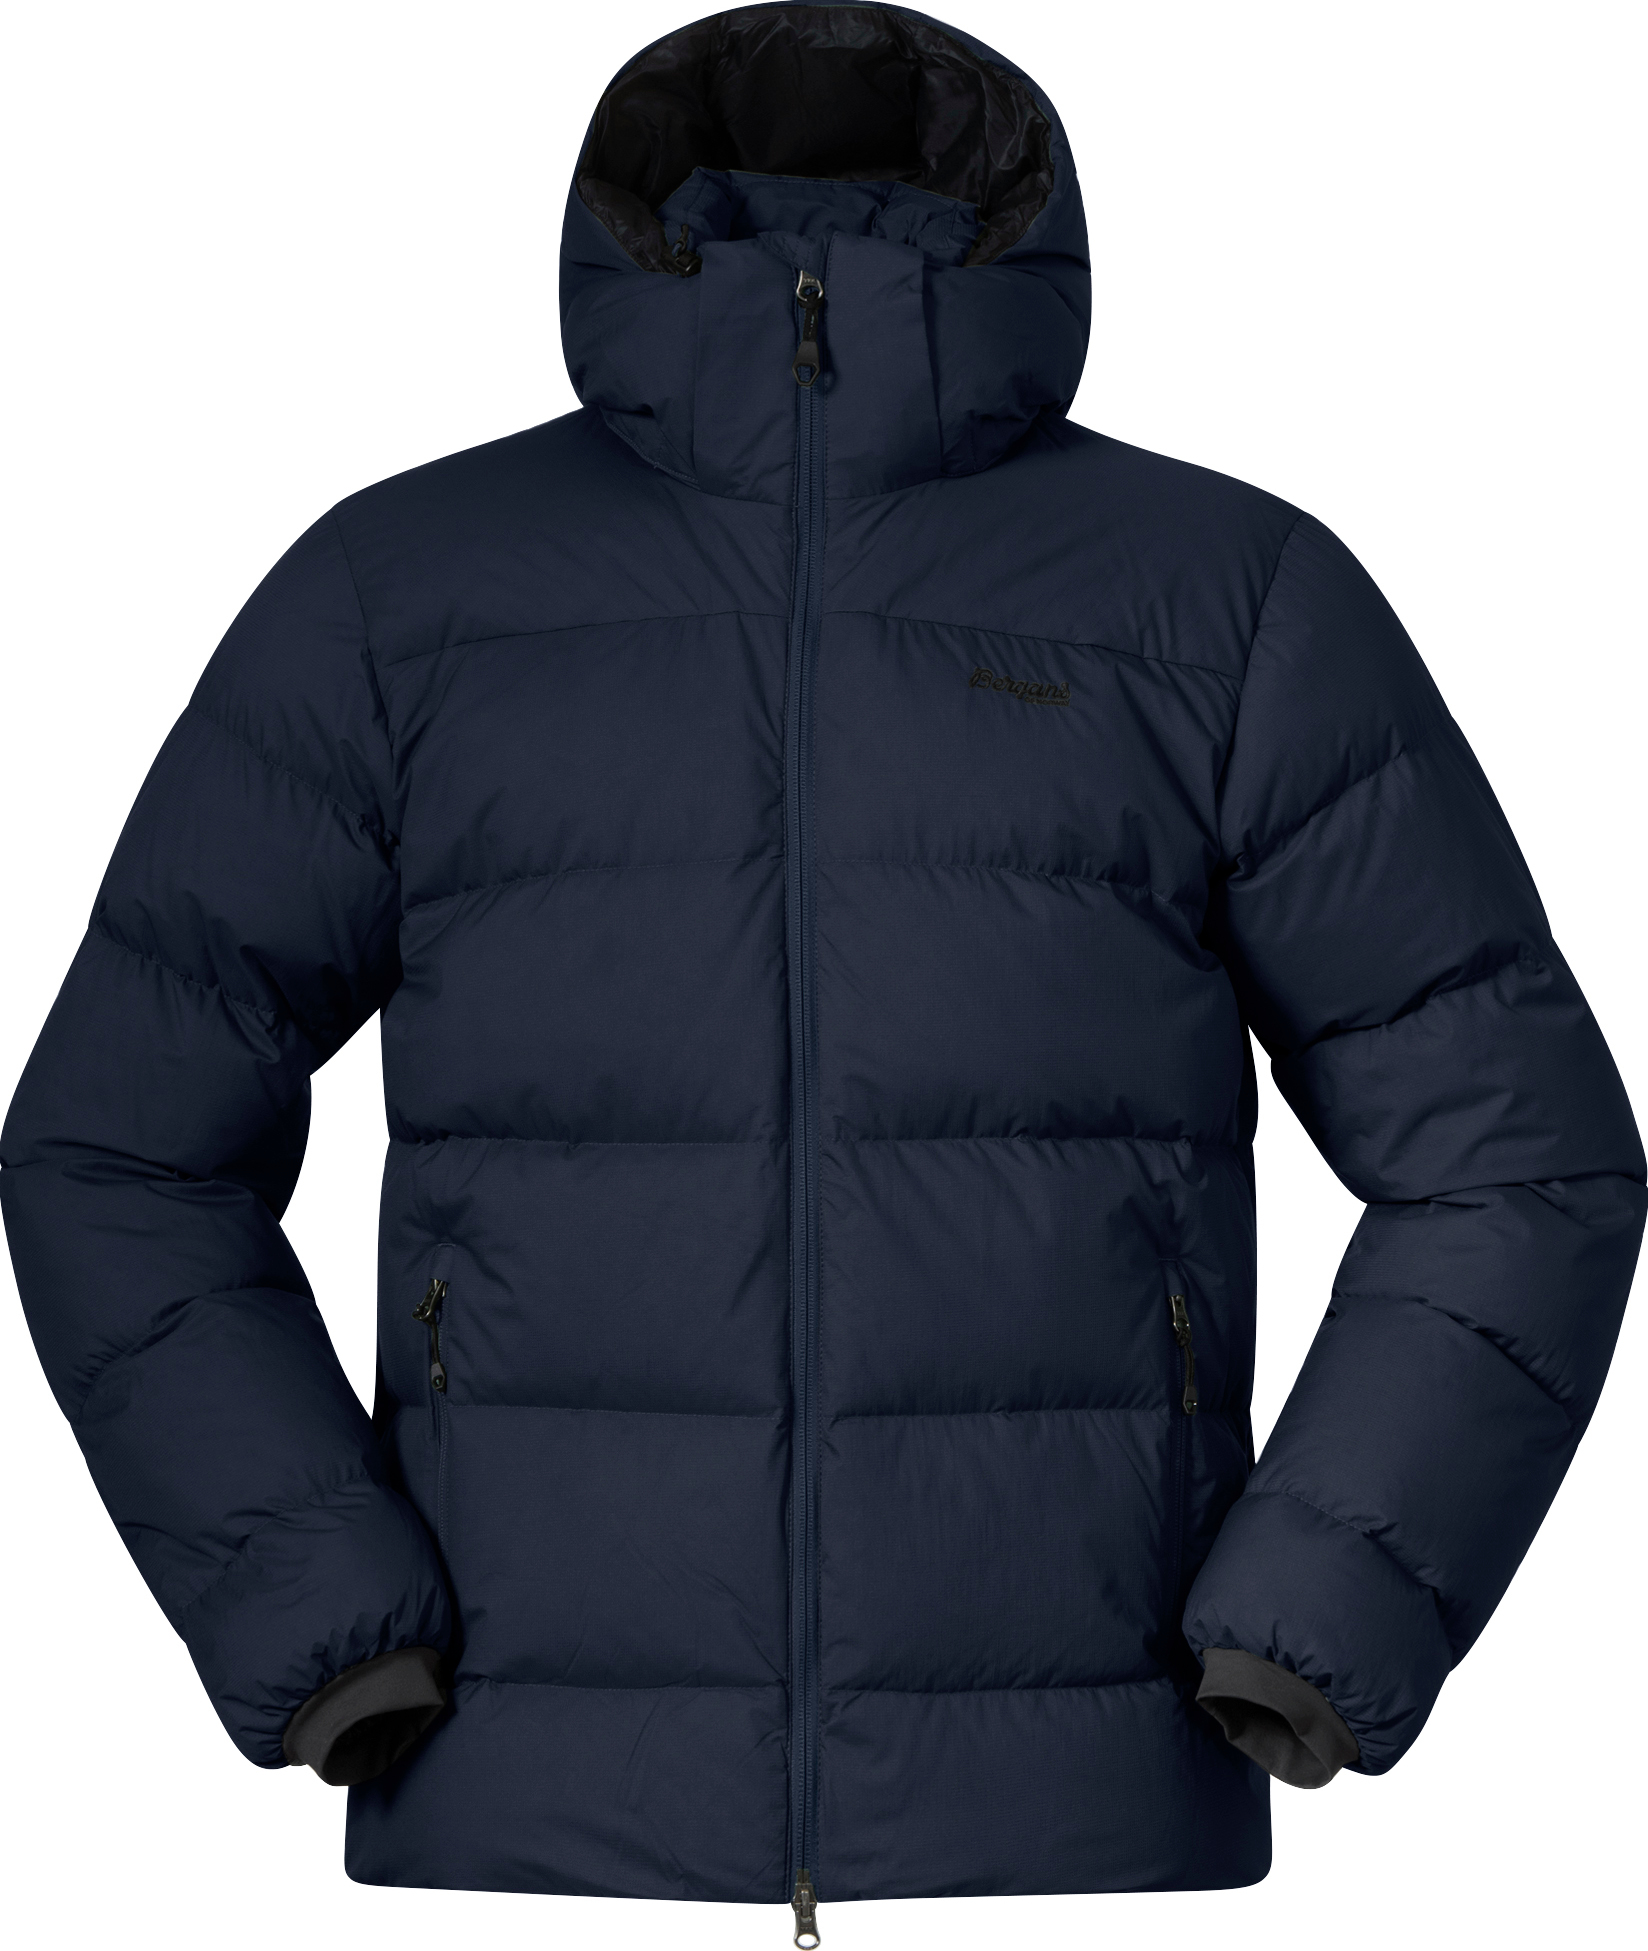 Men’s Lava Warm Down Jacket With Hood Navy Blue